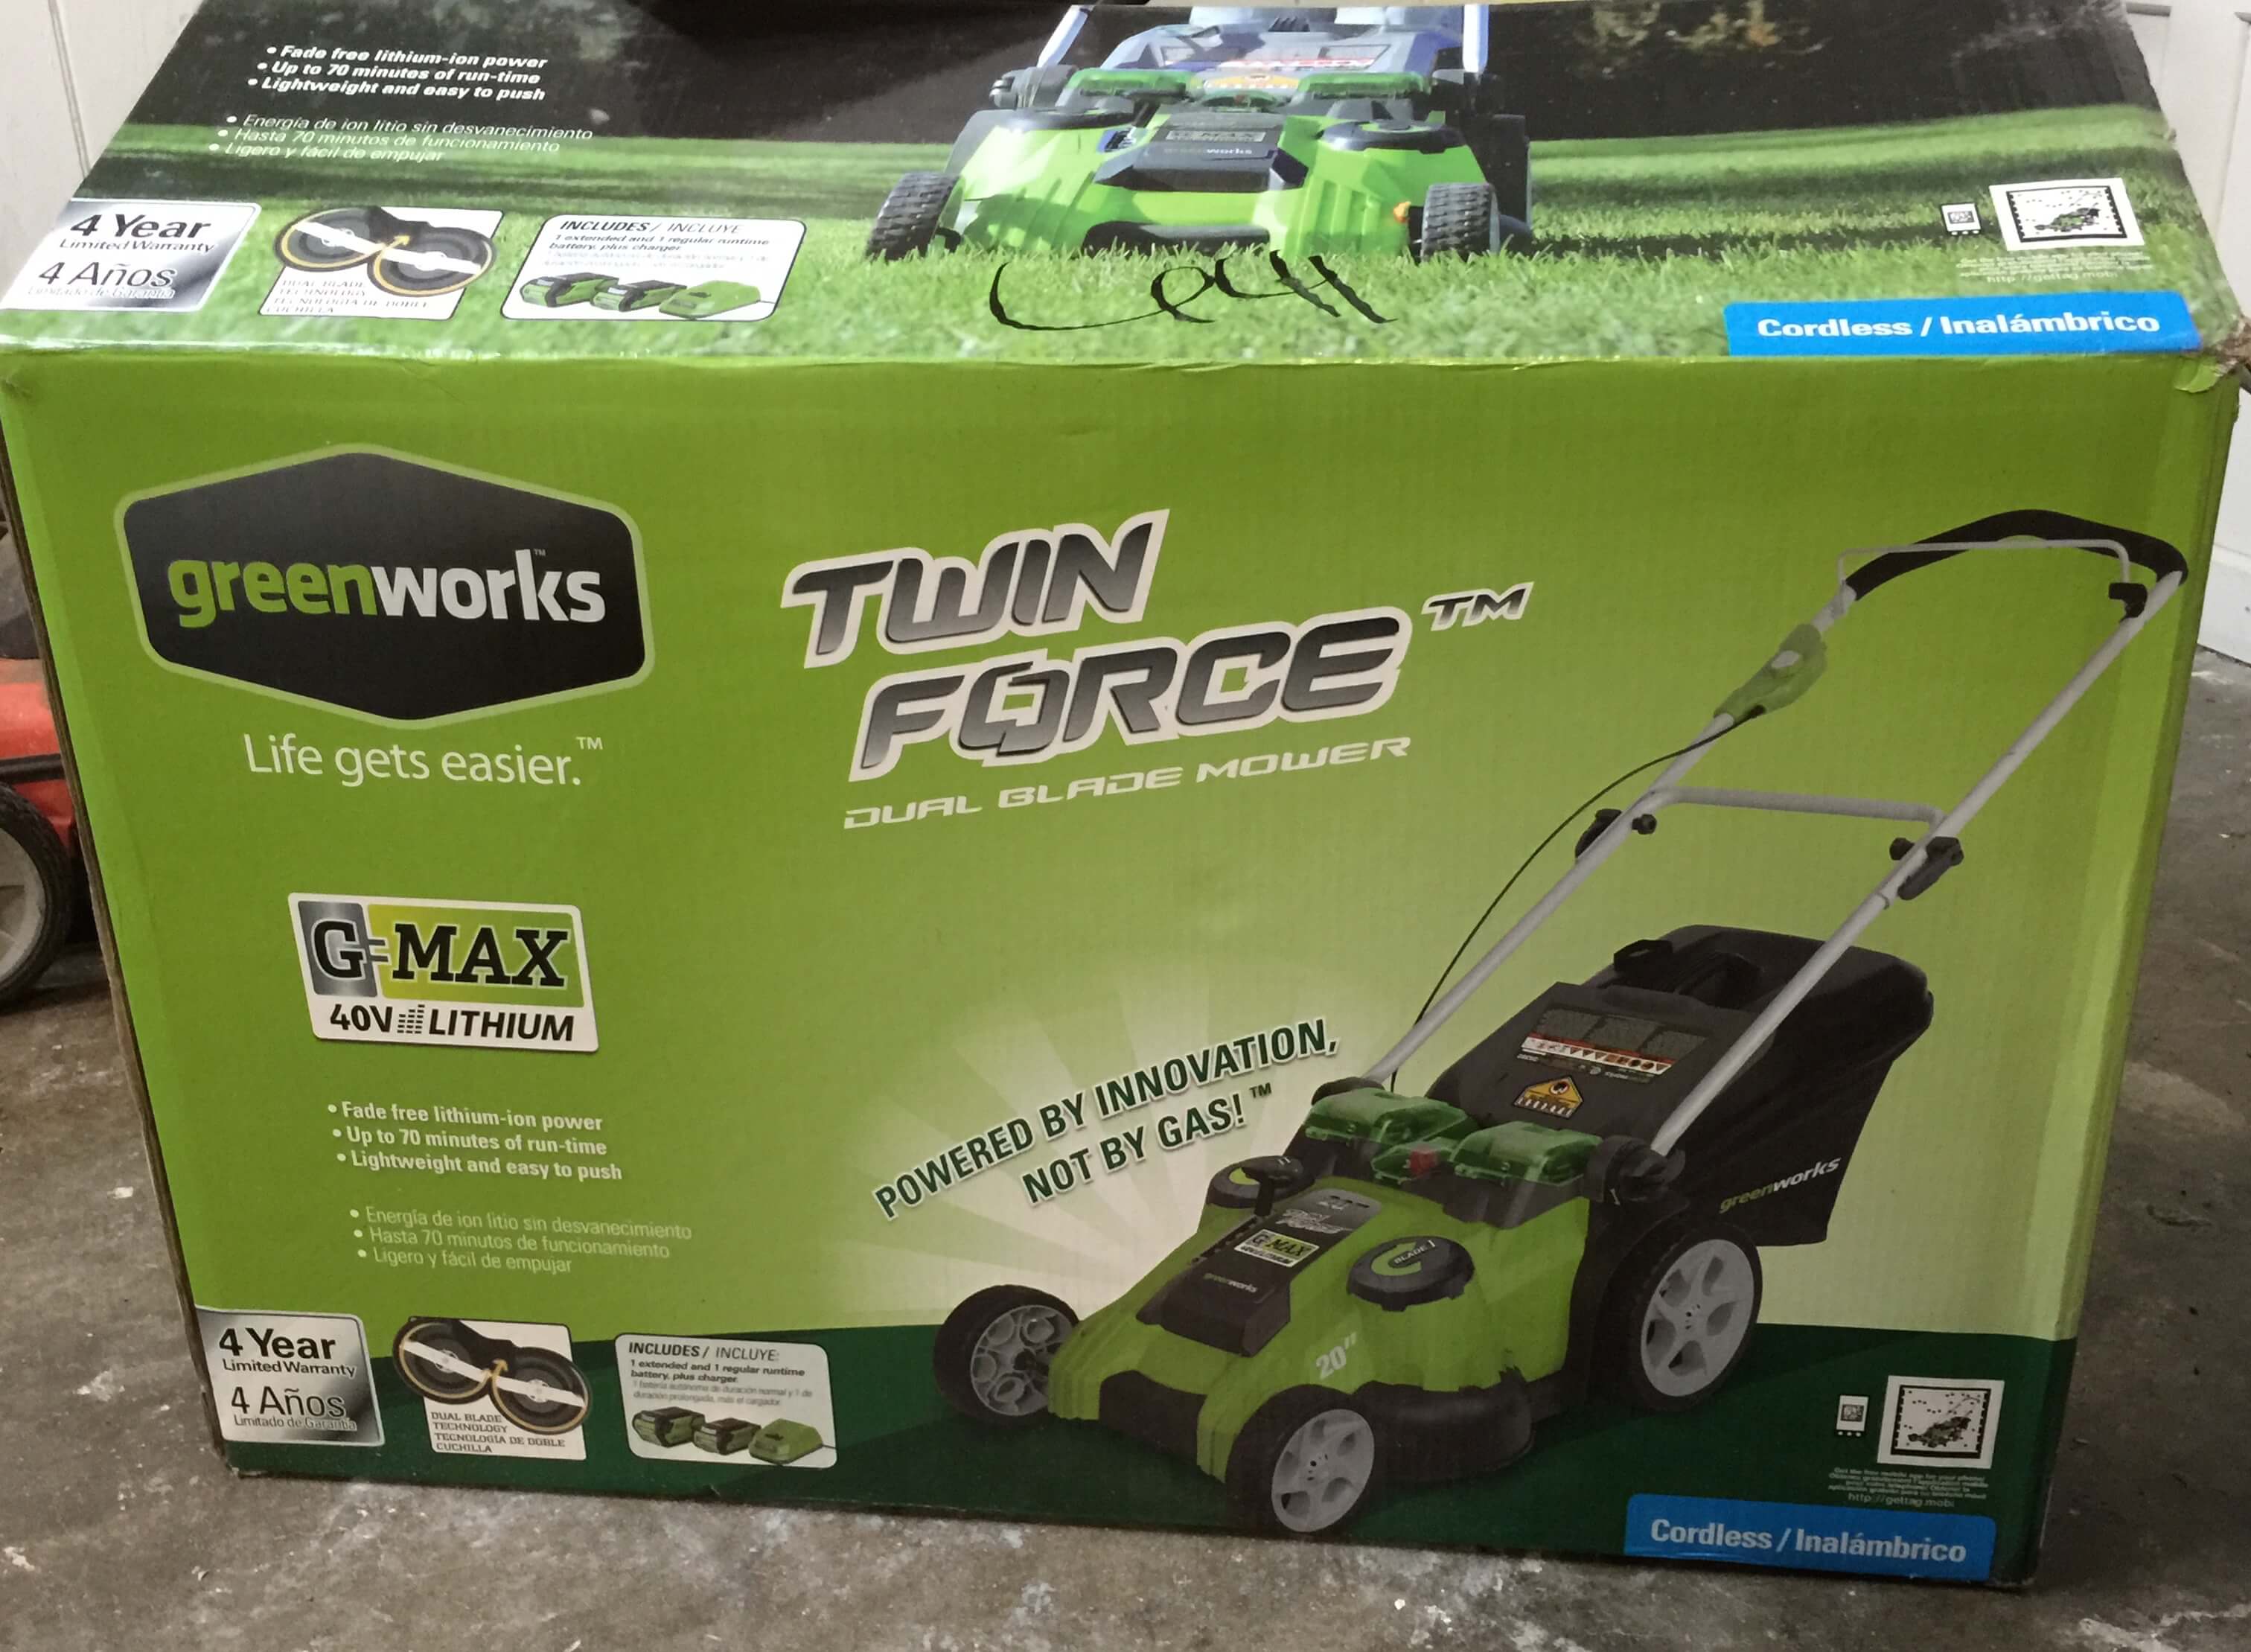 #greenworks Twin Force Dual Blade Mower: Review